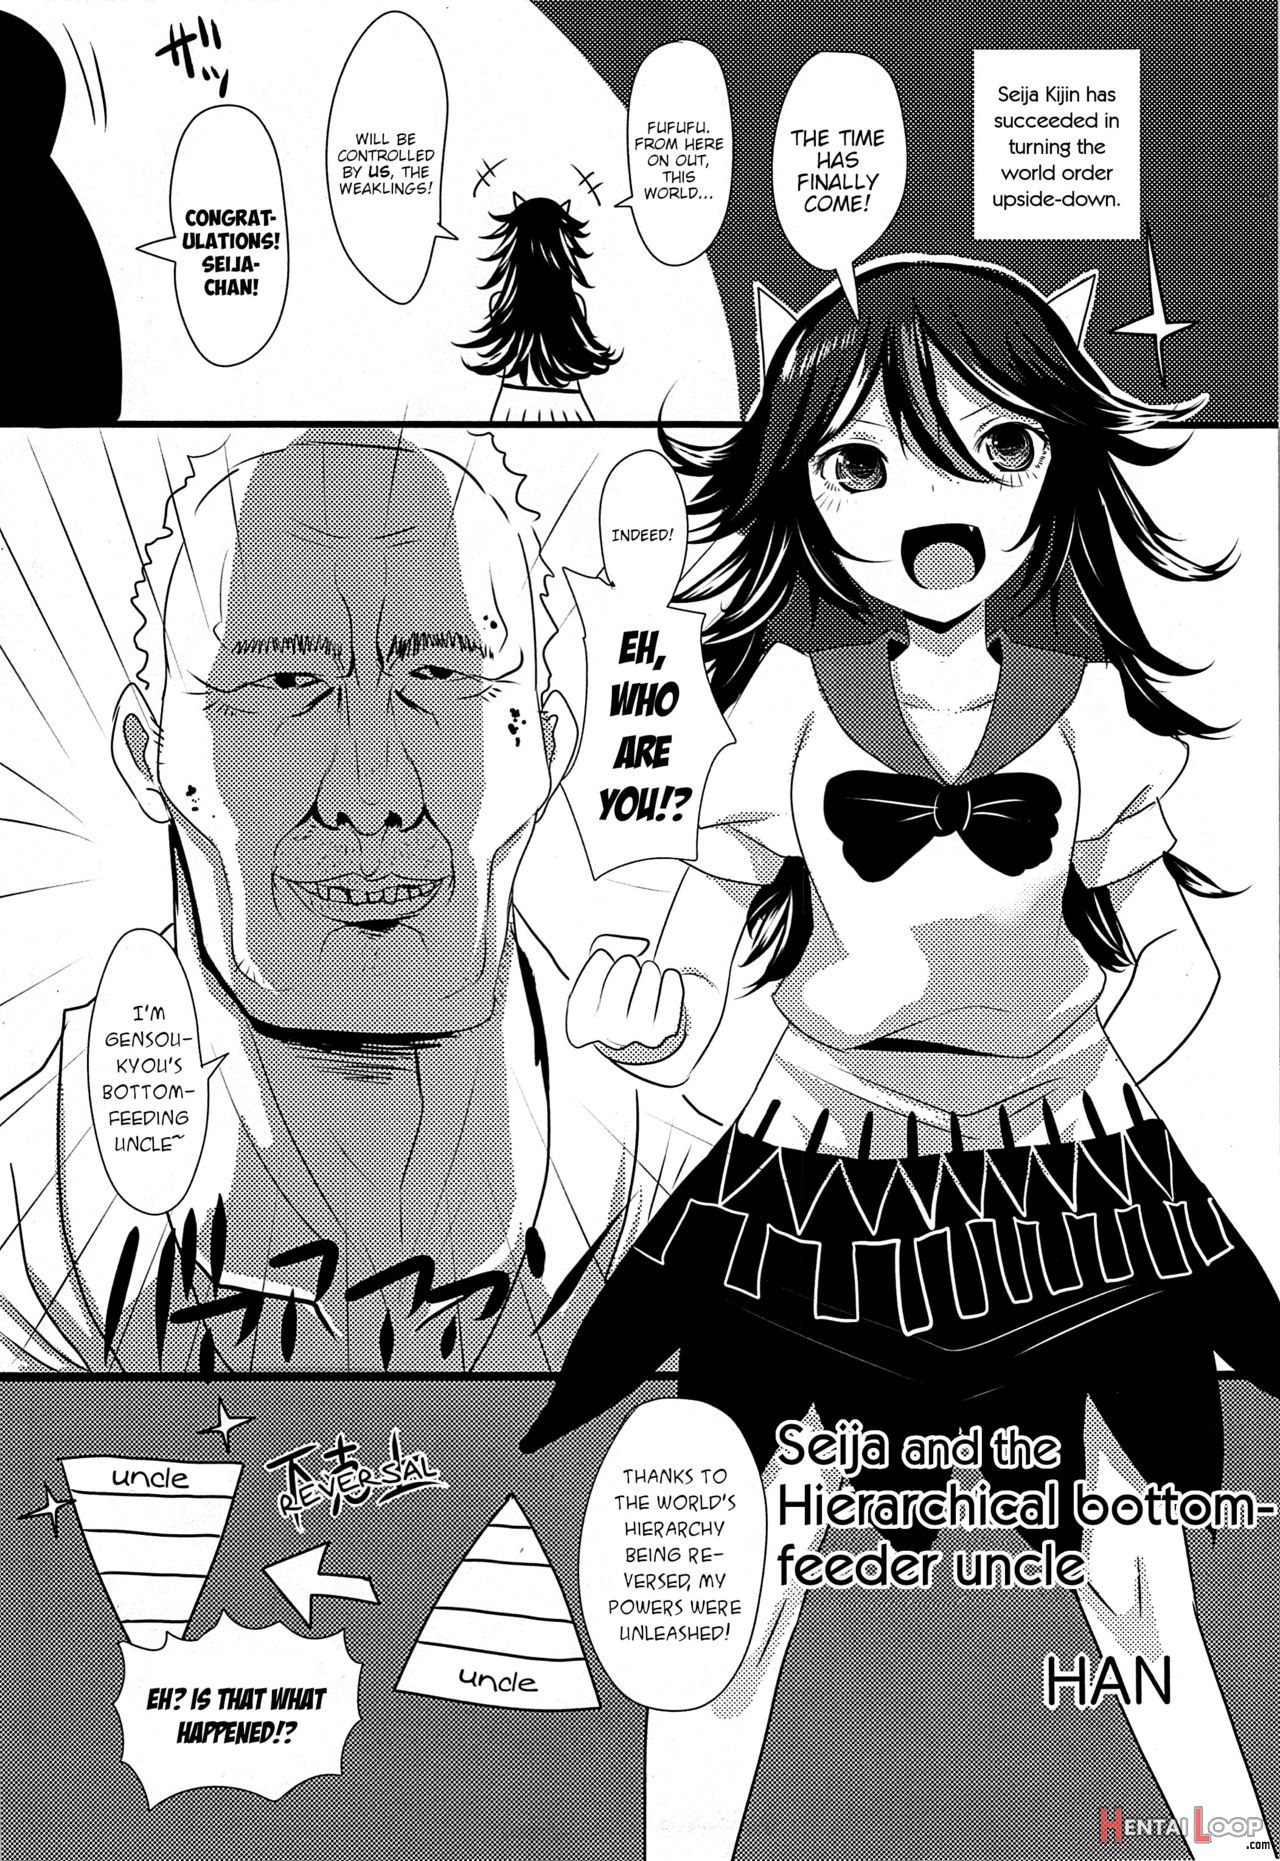 Hooray! A Seeding Uncle Has Made It Into Gensoukyou page 75